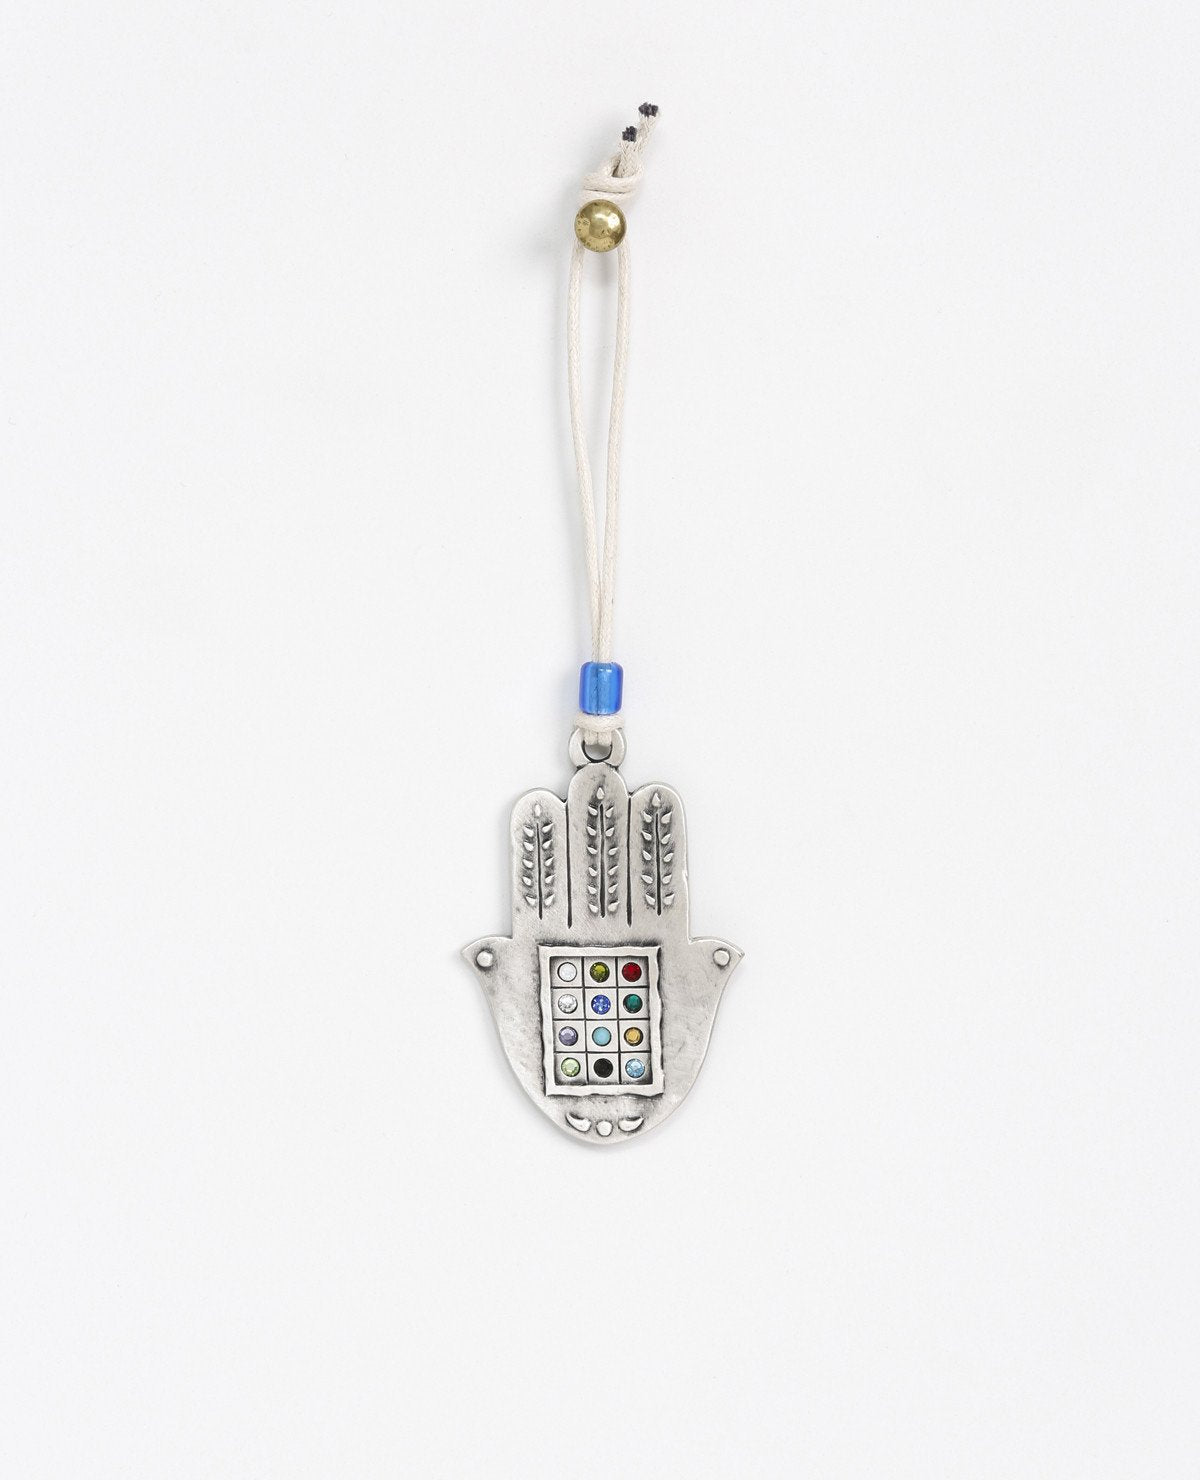 Sterling silver plated car pendant with a blue bead and Swarovsky crystals.  Length: 8 cm  Width: 5 cm